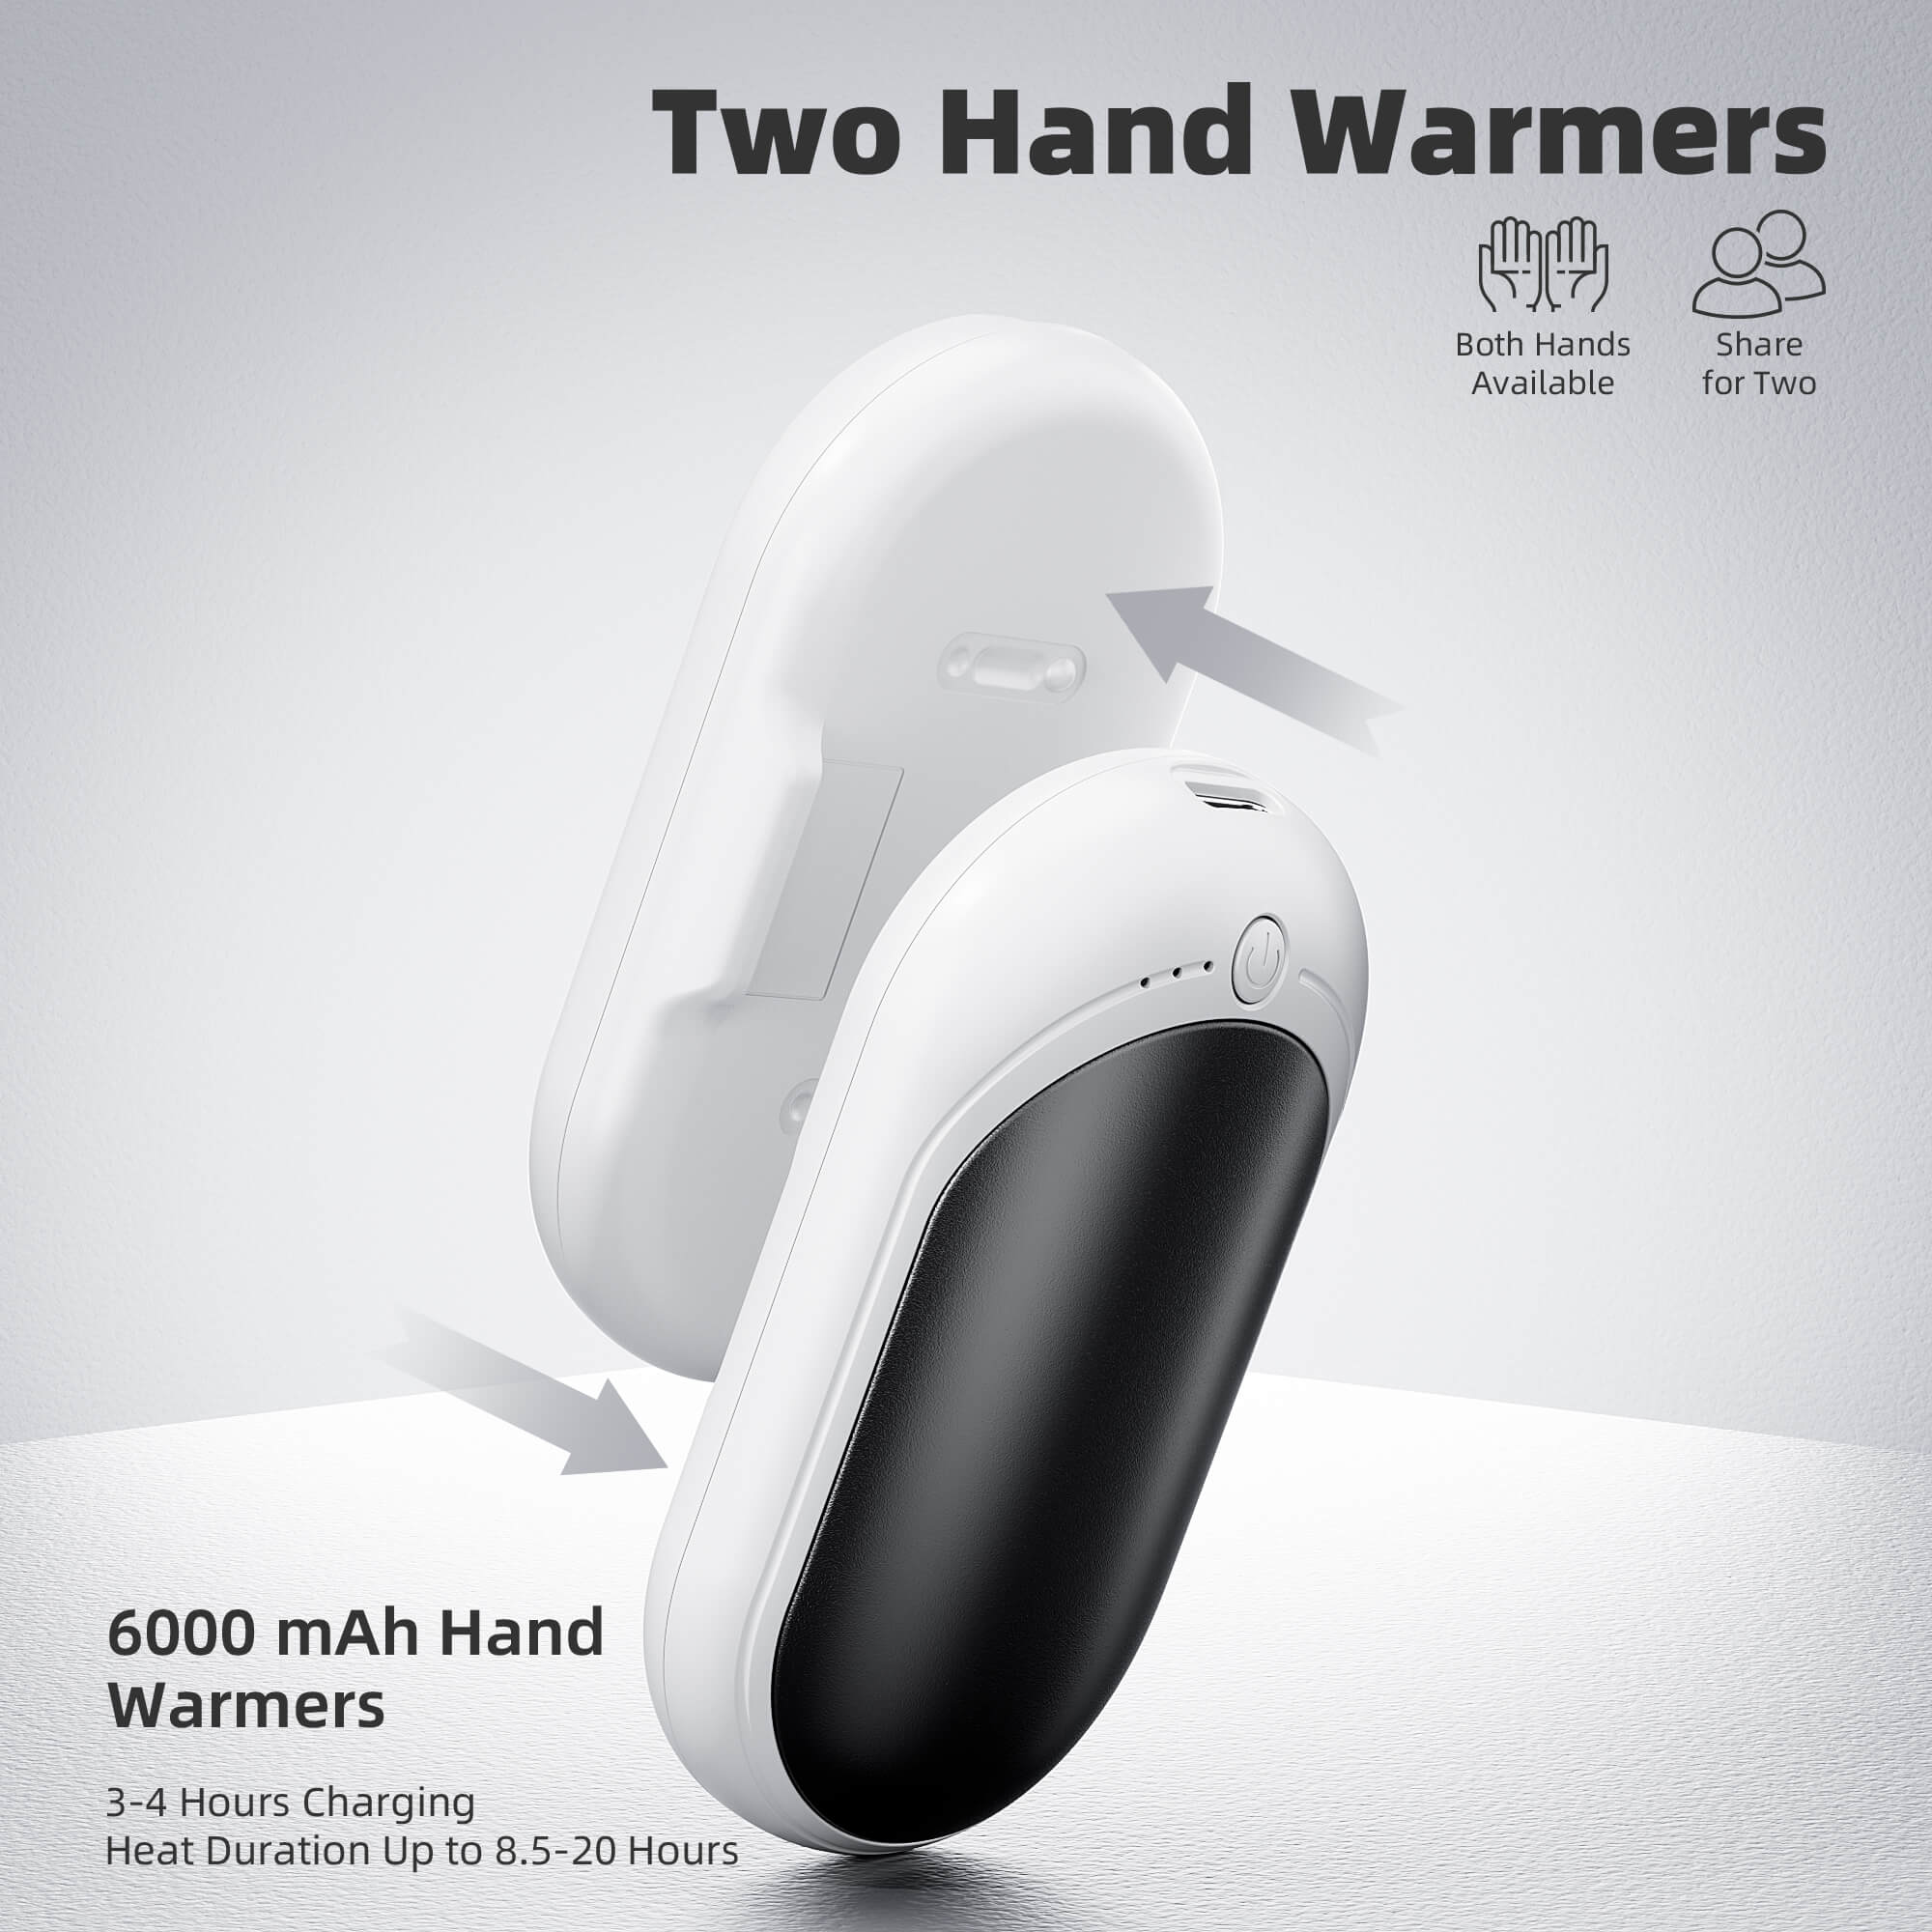 Xtao 2-Pack Hand Warmer Rechargeable, Upgraded 2-in-1 6000mAh Electric Hand Warmers, Portable USB Reusable Handwarmer, for Outdoor Camping, Skiing, Hunting, Golf, Gift for Women Kid or Reno Patient